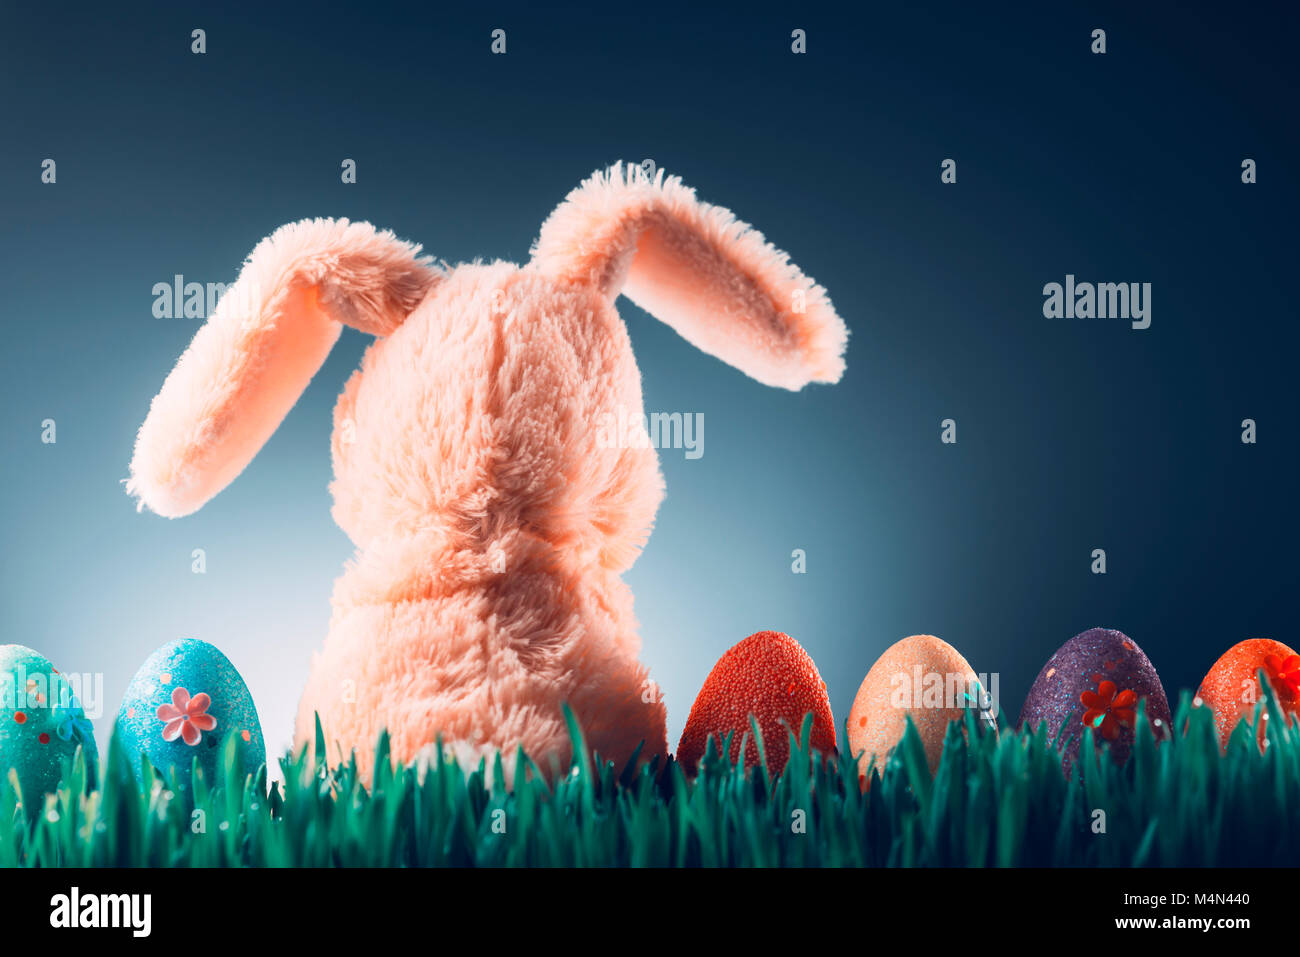 Easter background concept with bunny toy Stock Photo